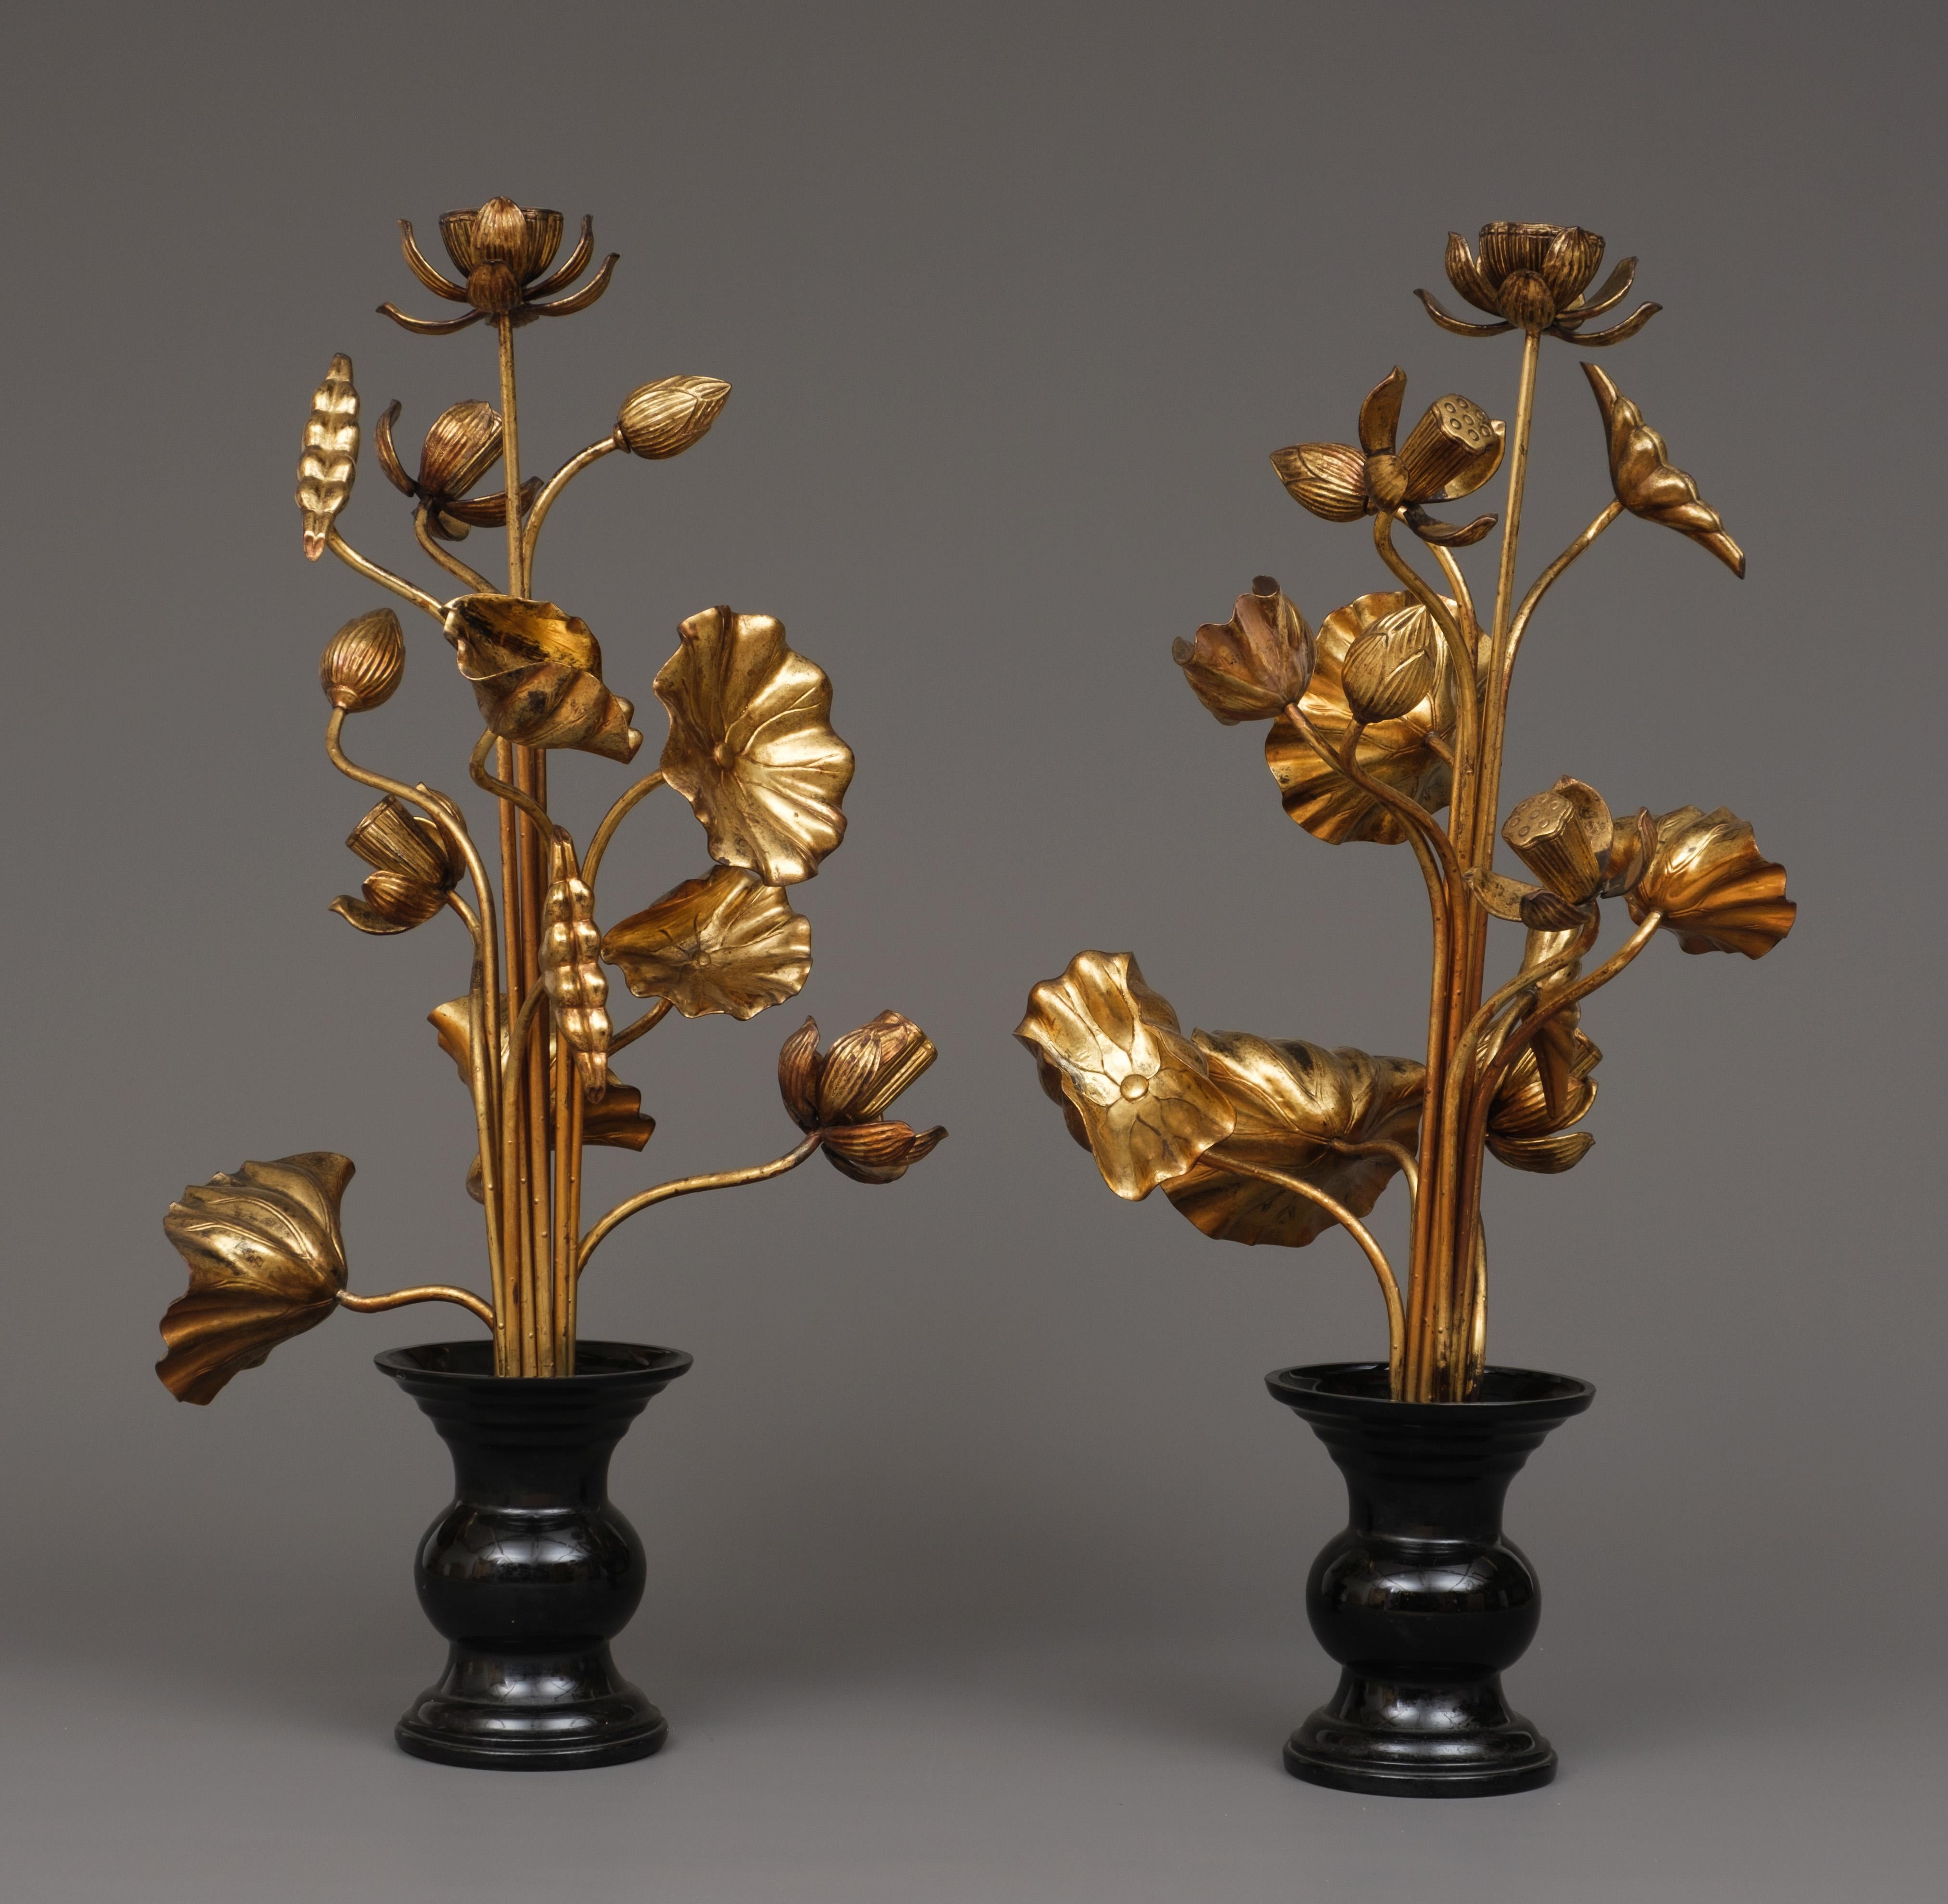 Large pair of Japanese ‘Jyôka’ 常花, sets of gilded lotus flowers and -leaves. For Sale 2